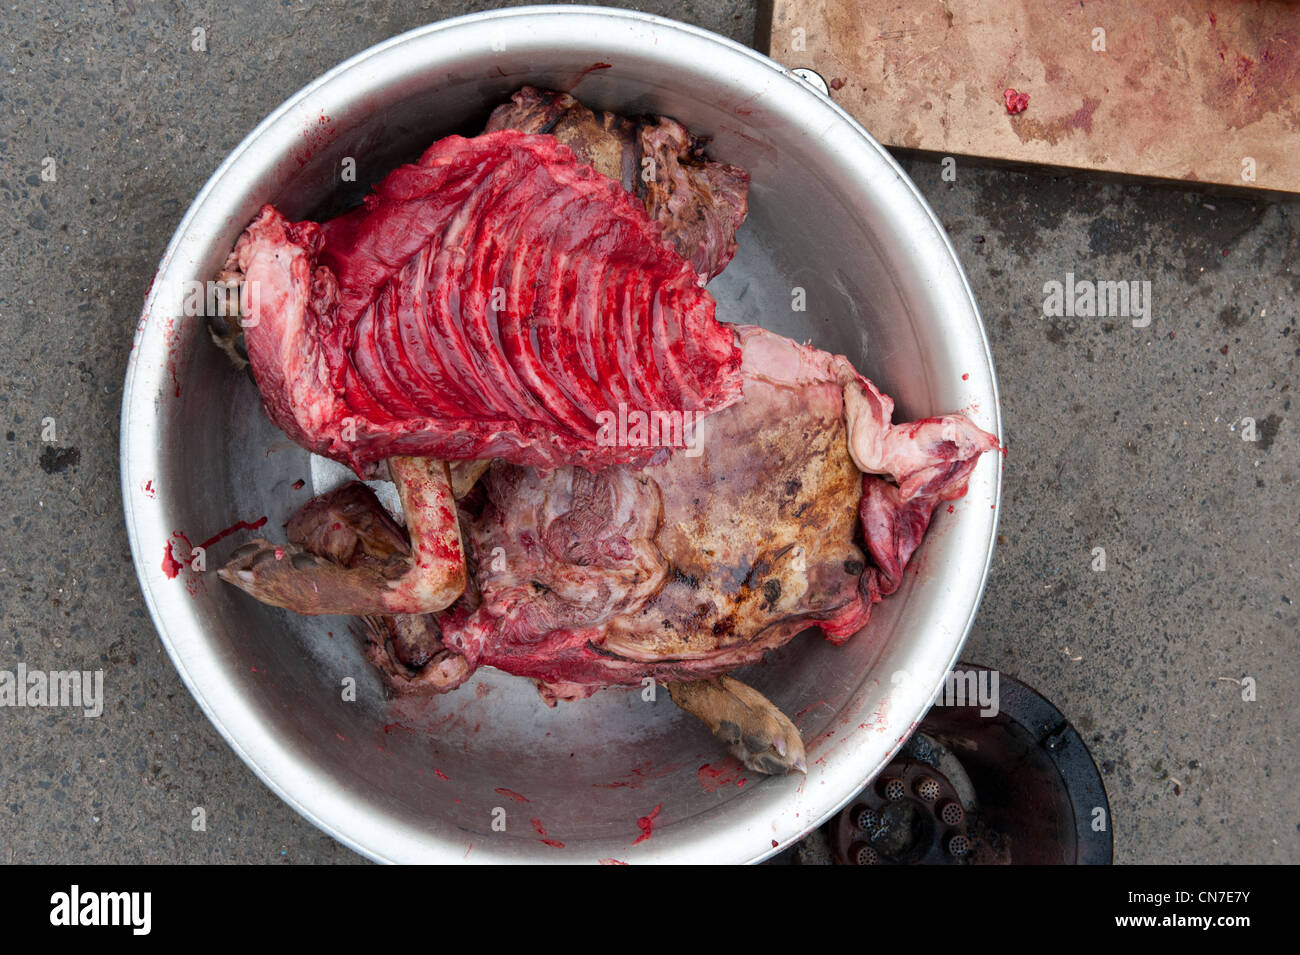 Beijing, Dongcuijia Cun. Dissected dog meat. Stock Photo